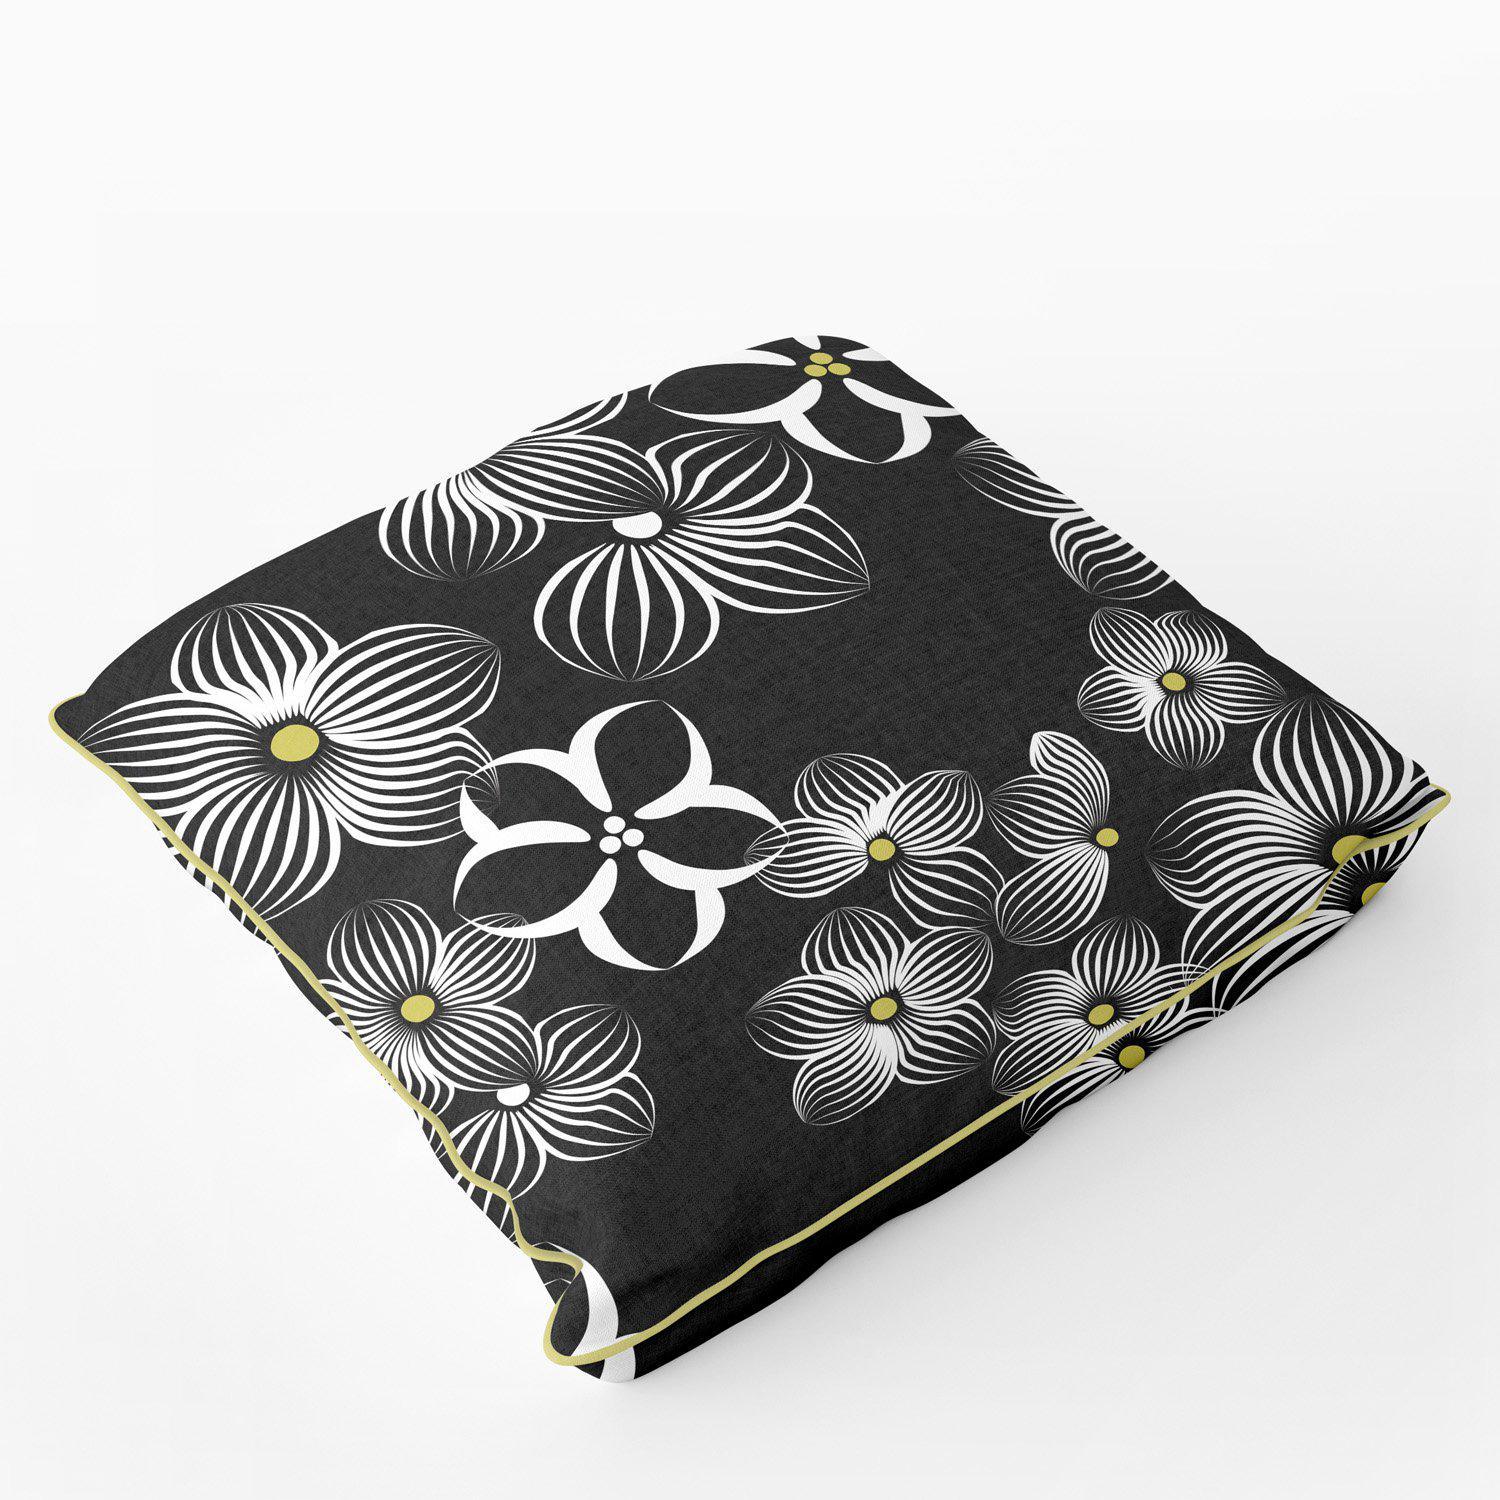 Floral Impression (Black) - Funky Art Cushion - Perfect Day - House Of Turnowsky Pillows - Handmade Cushions UK - WeLoveCushions